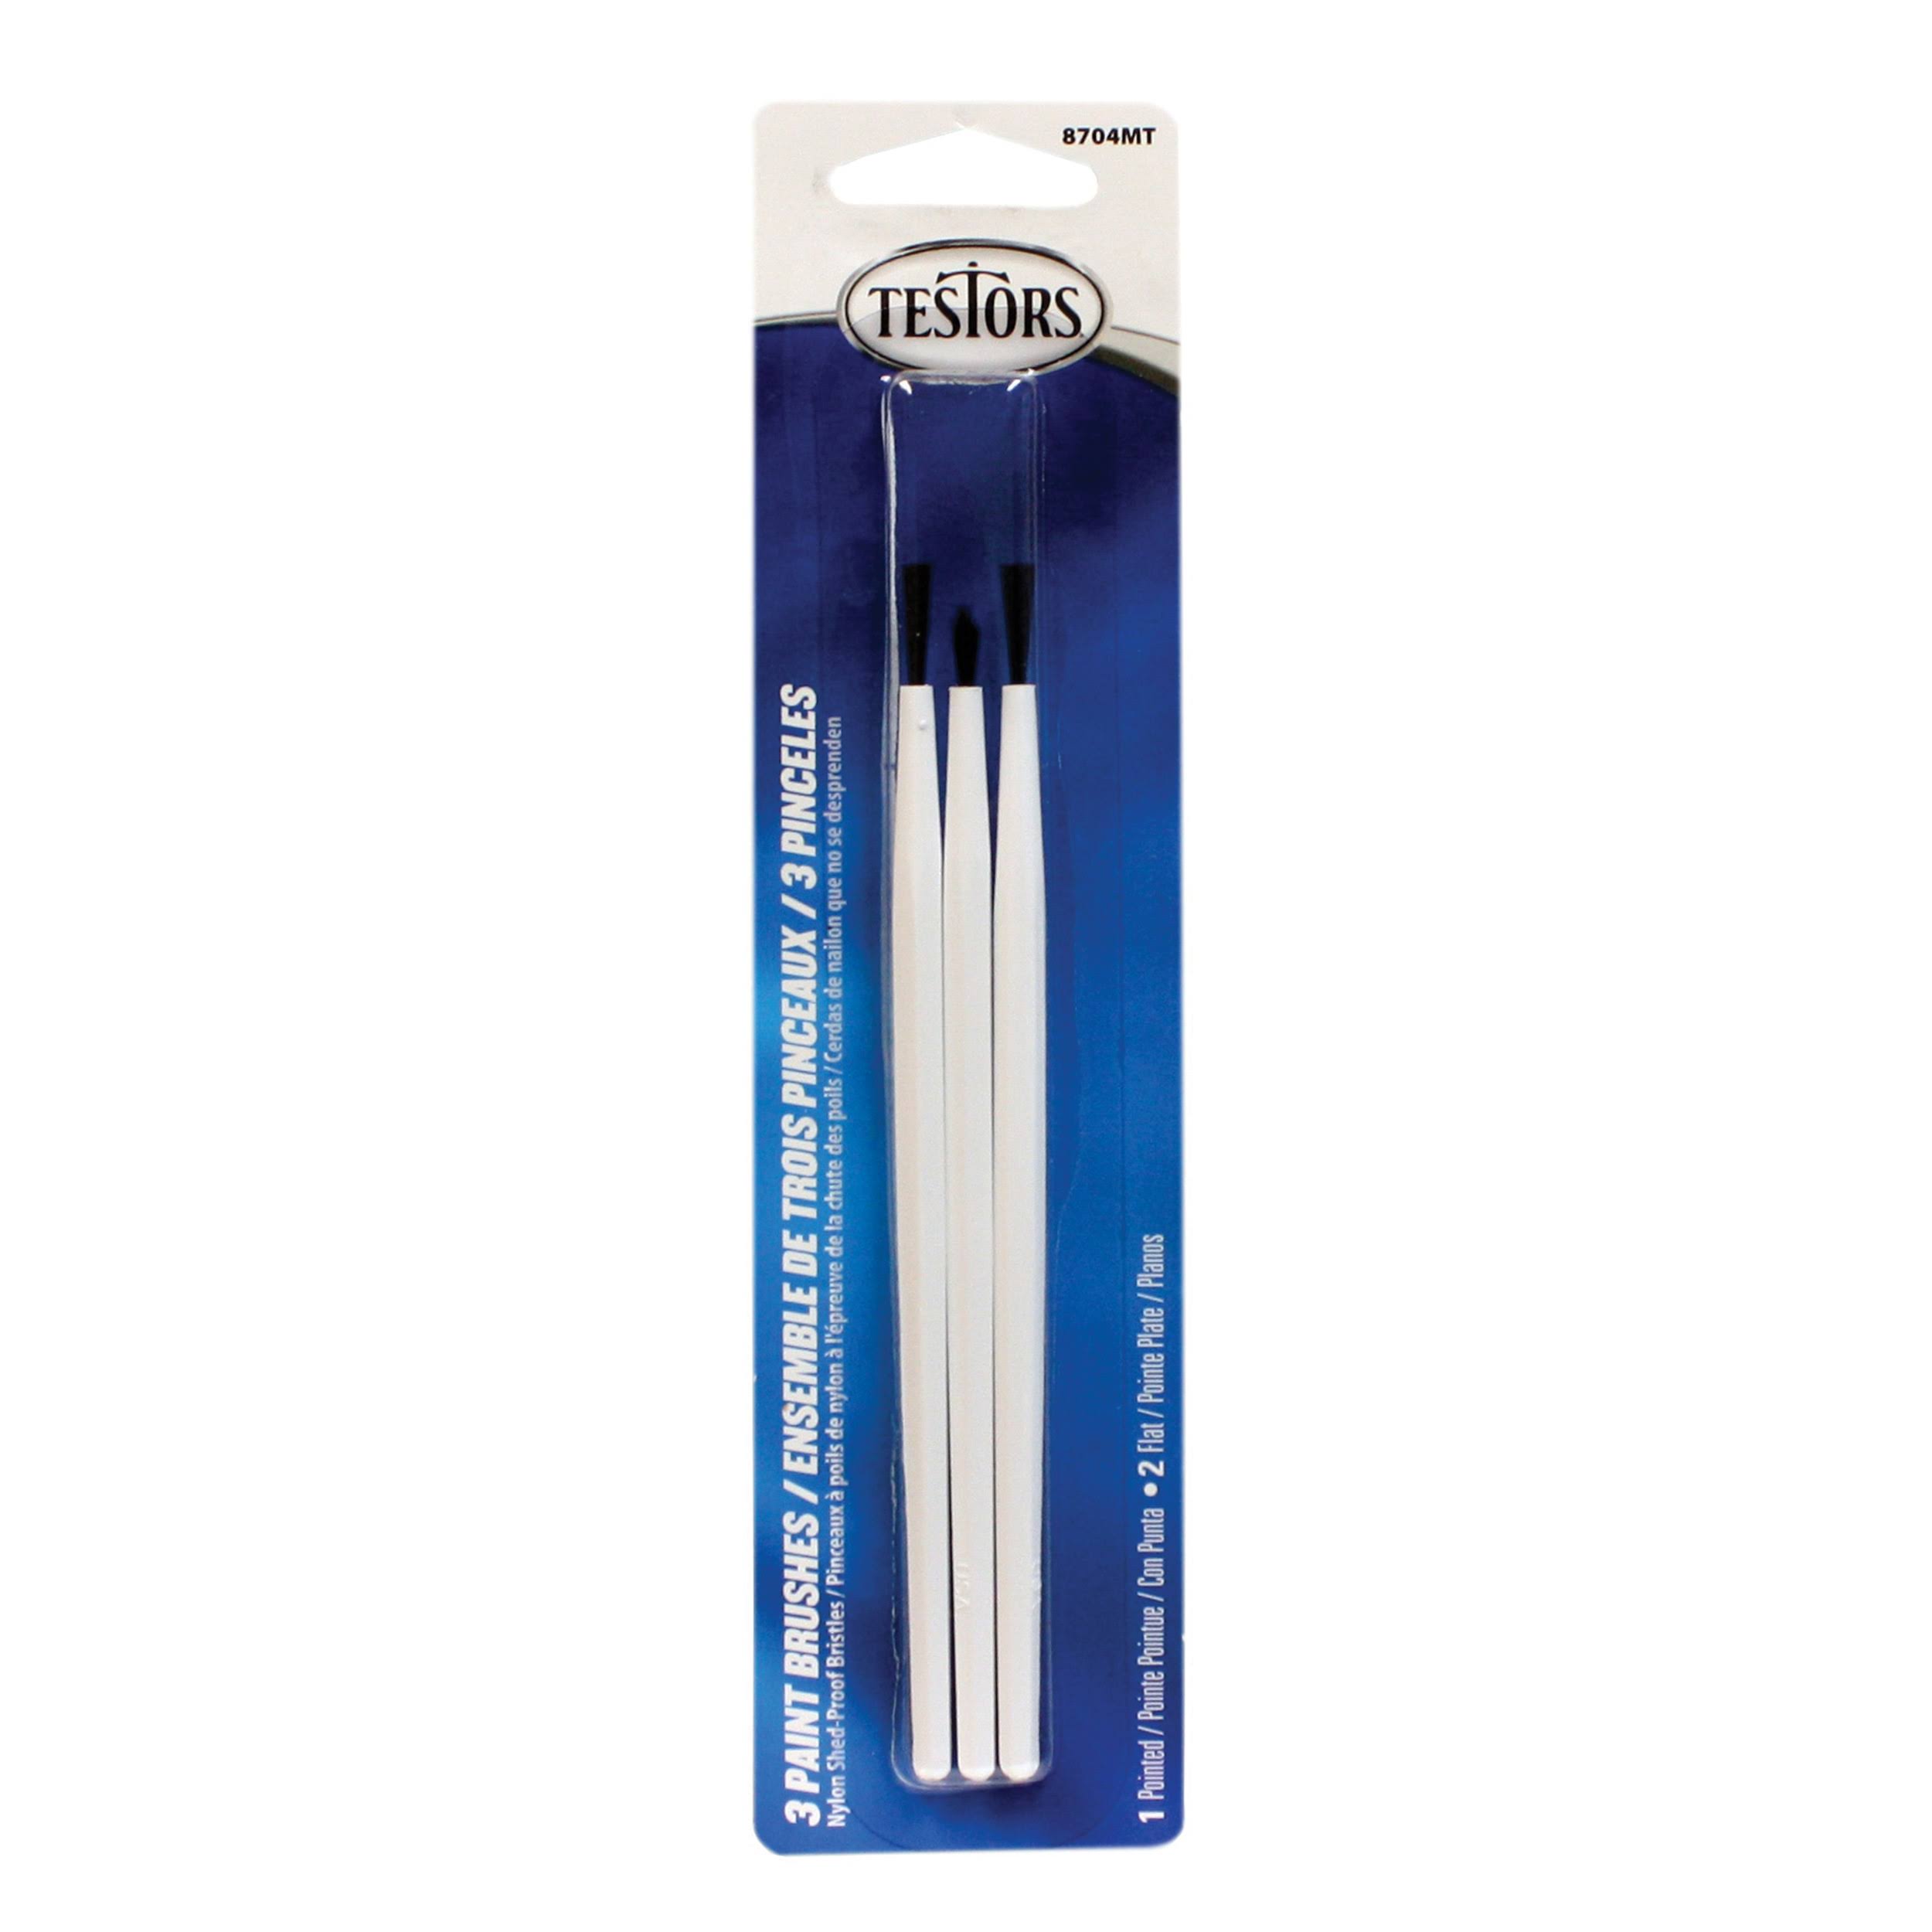 Testors Paint Brushes - 2 Flat & 1 Pointed